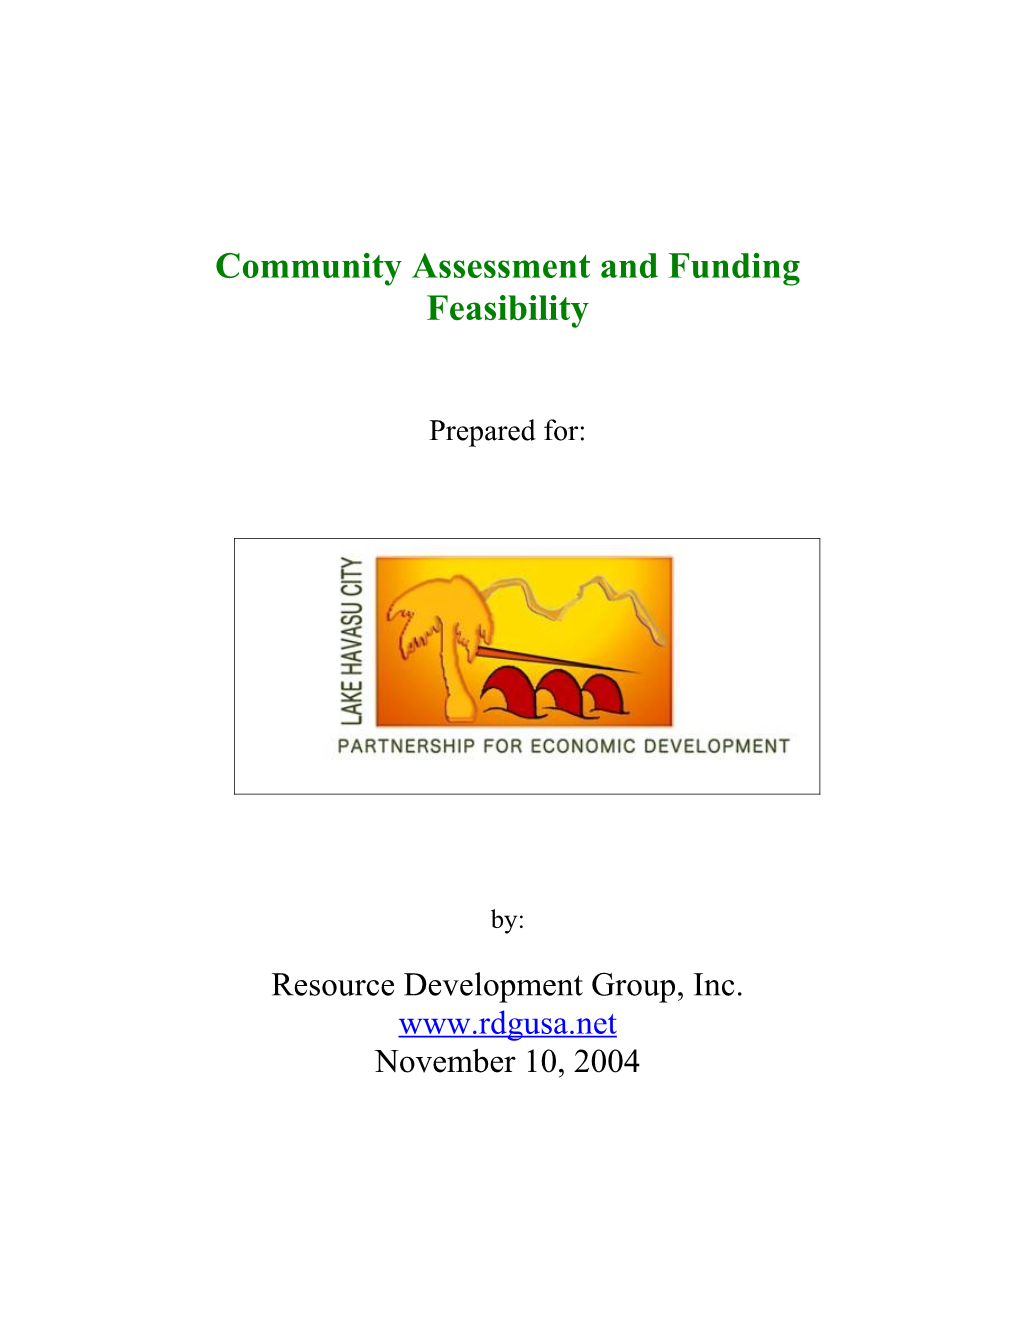 Community Assessment and Funding Feasibility